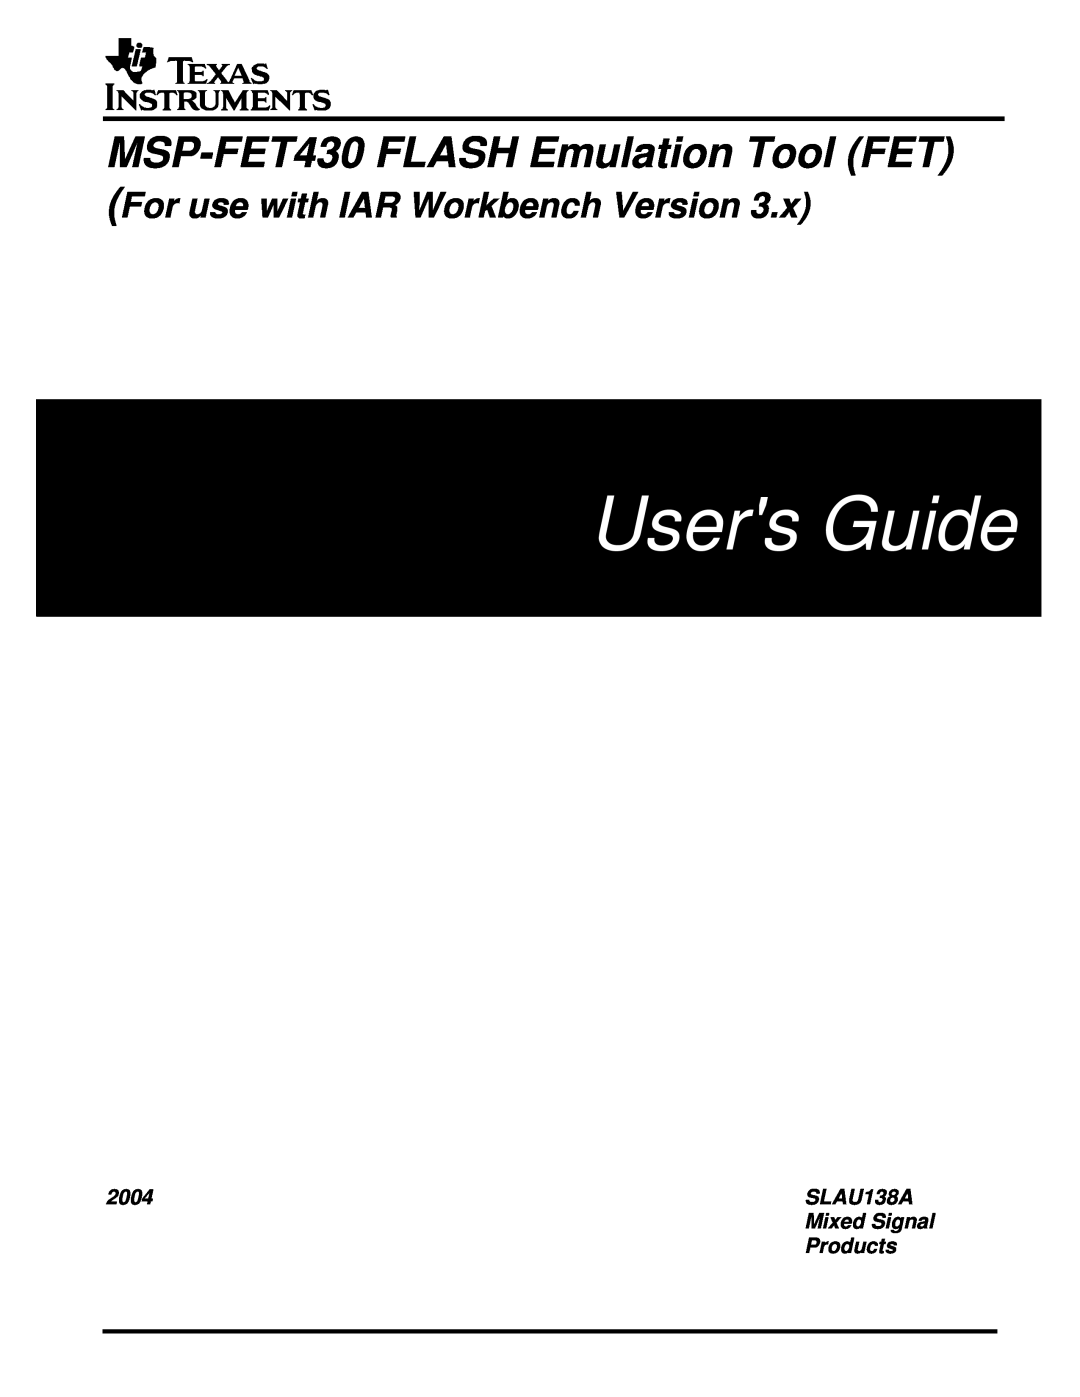 Texas Instruments manual 2004, Users Guide, MSP-FET430 FLASH Emulation Tool FET, For use with IAR Workbench Version 